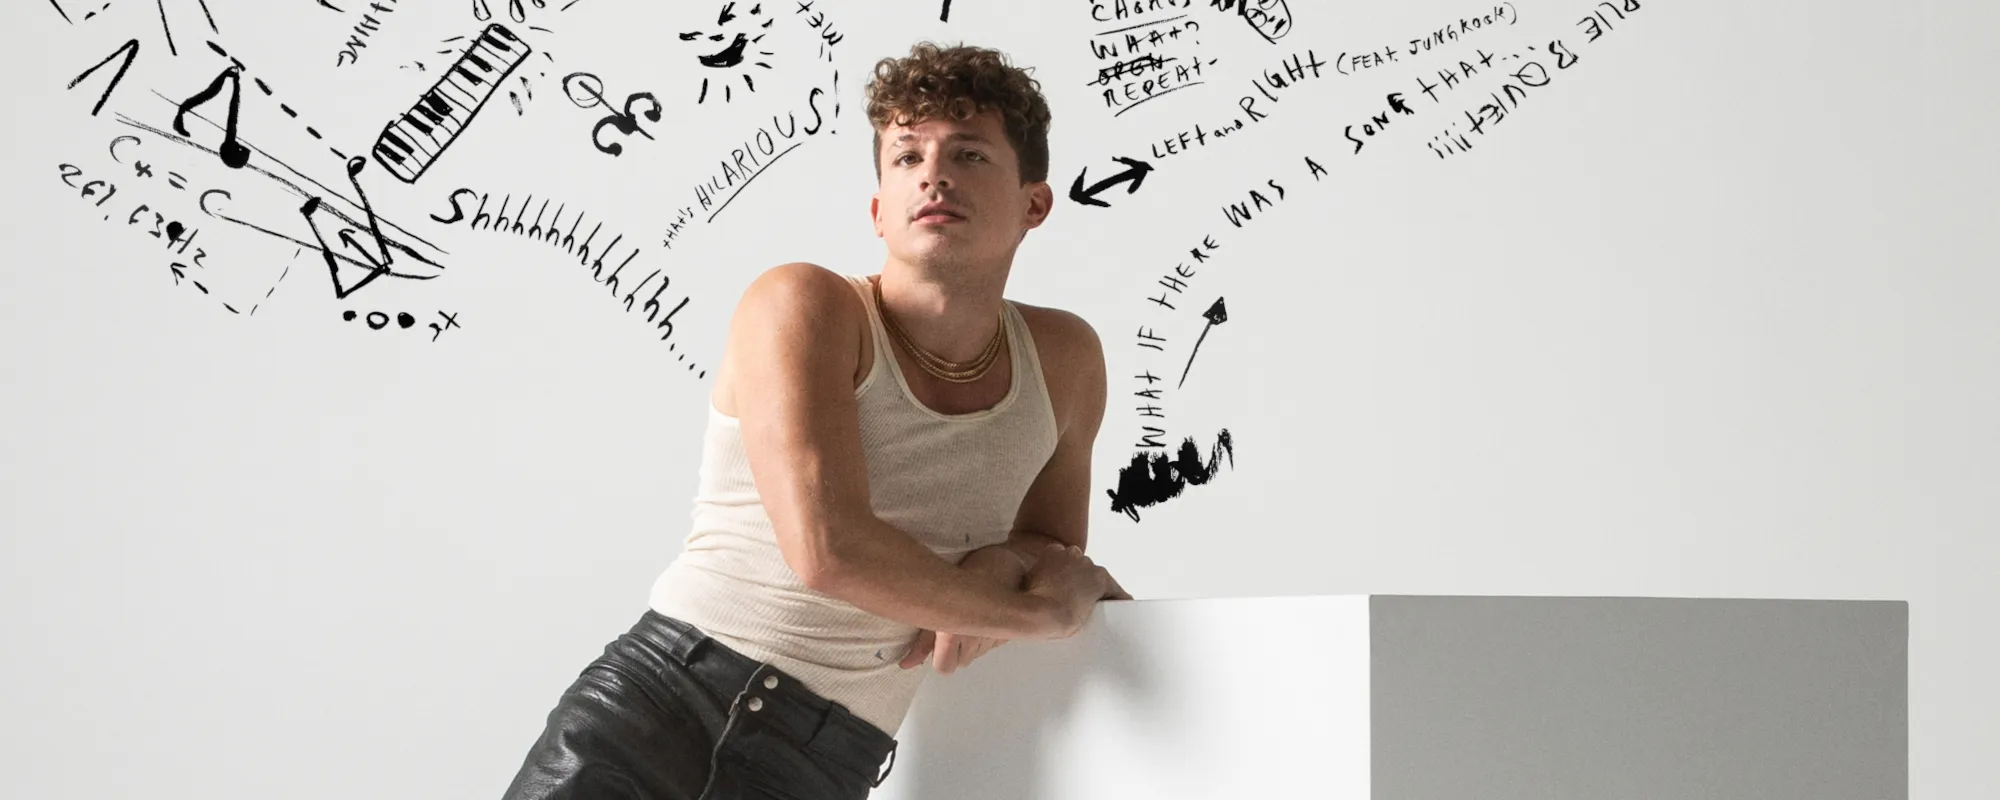 Charlie Puth Announces Winter Tour Dates, Drops New Single, “I Don’t Think That I Like Her”